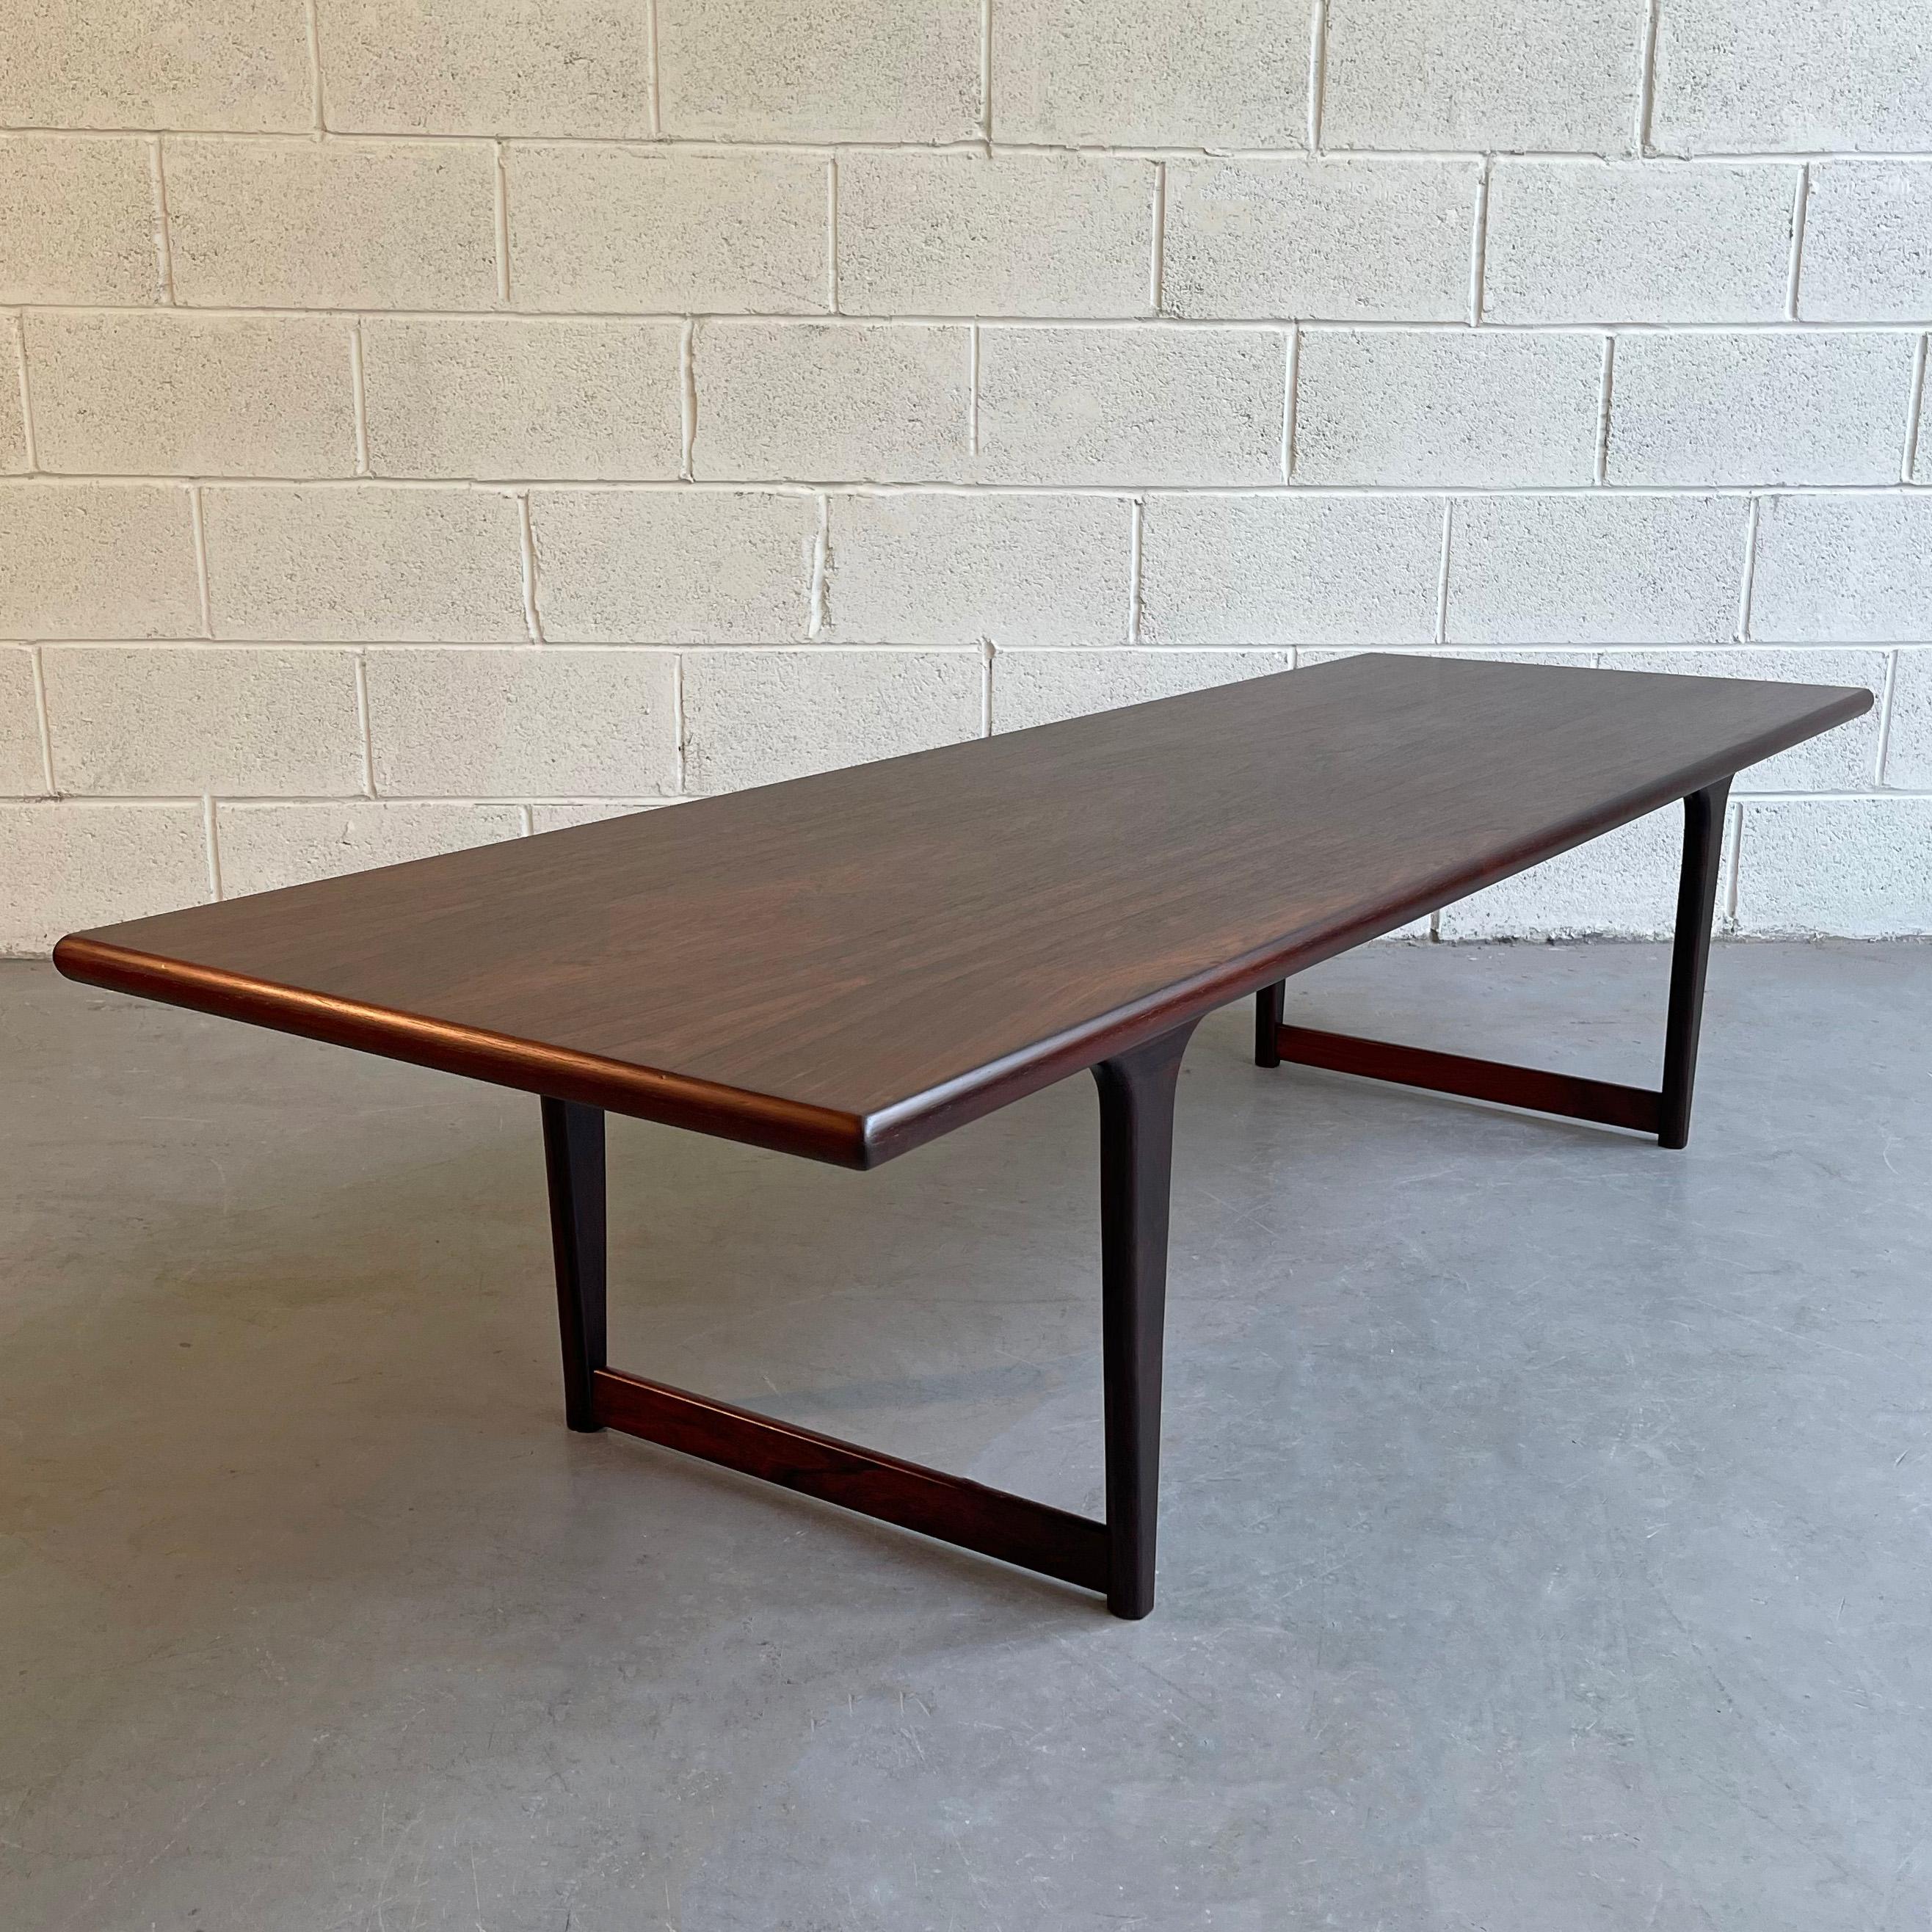 Danish Modern Rosewood Coffee Table In Good Condition For Sale In Brooklyn, NY